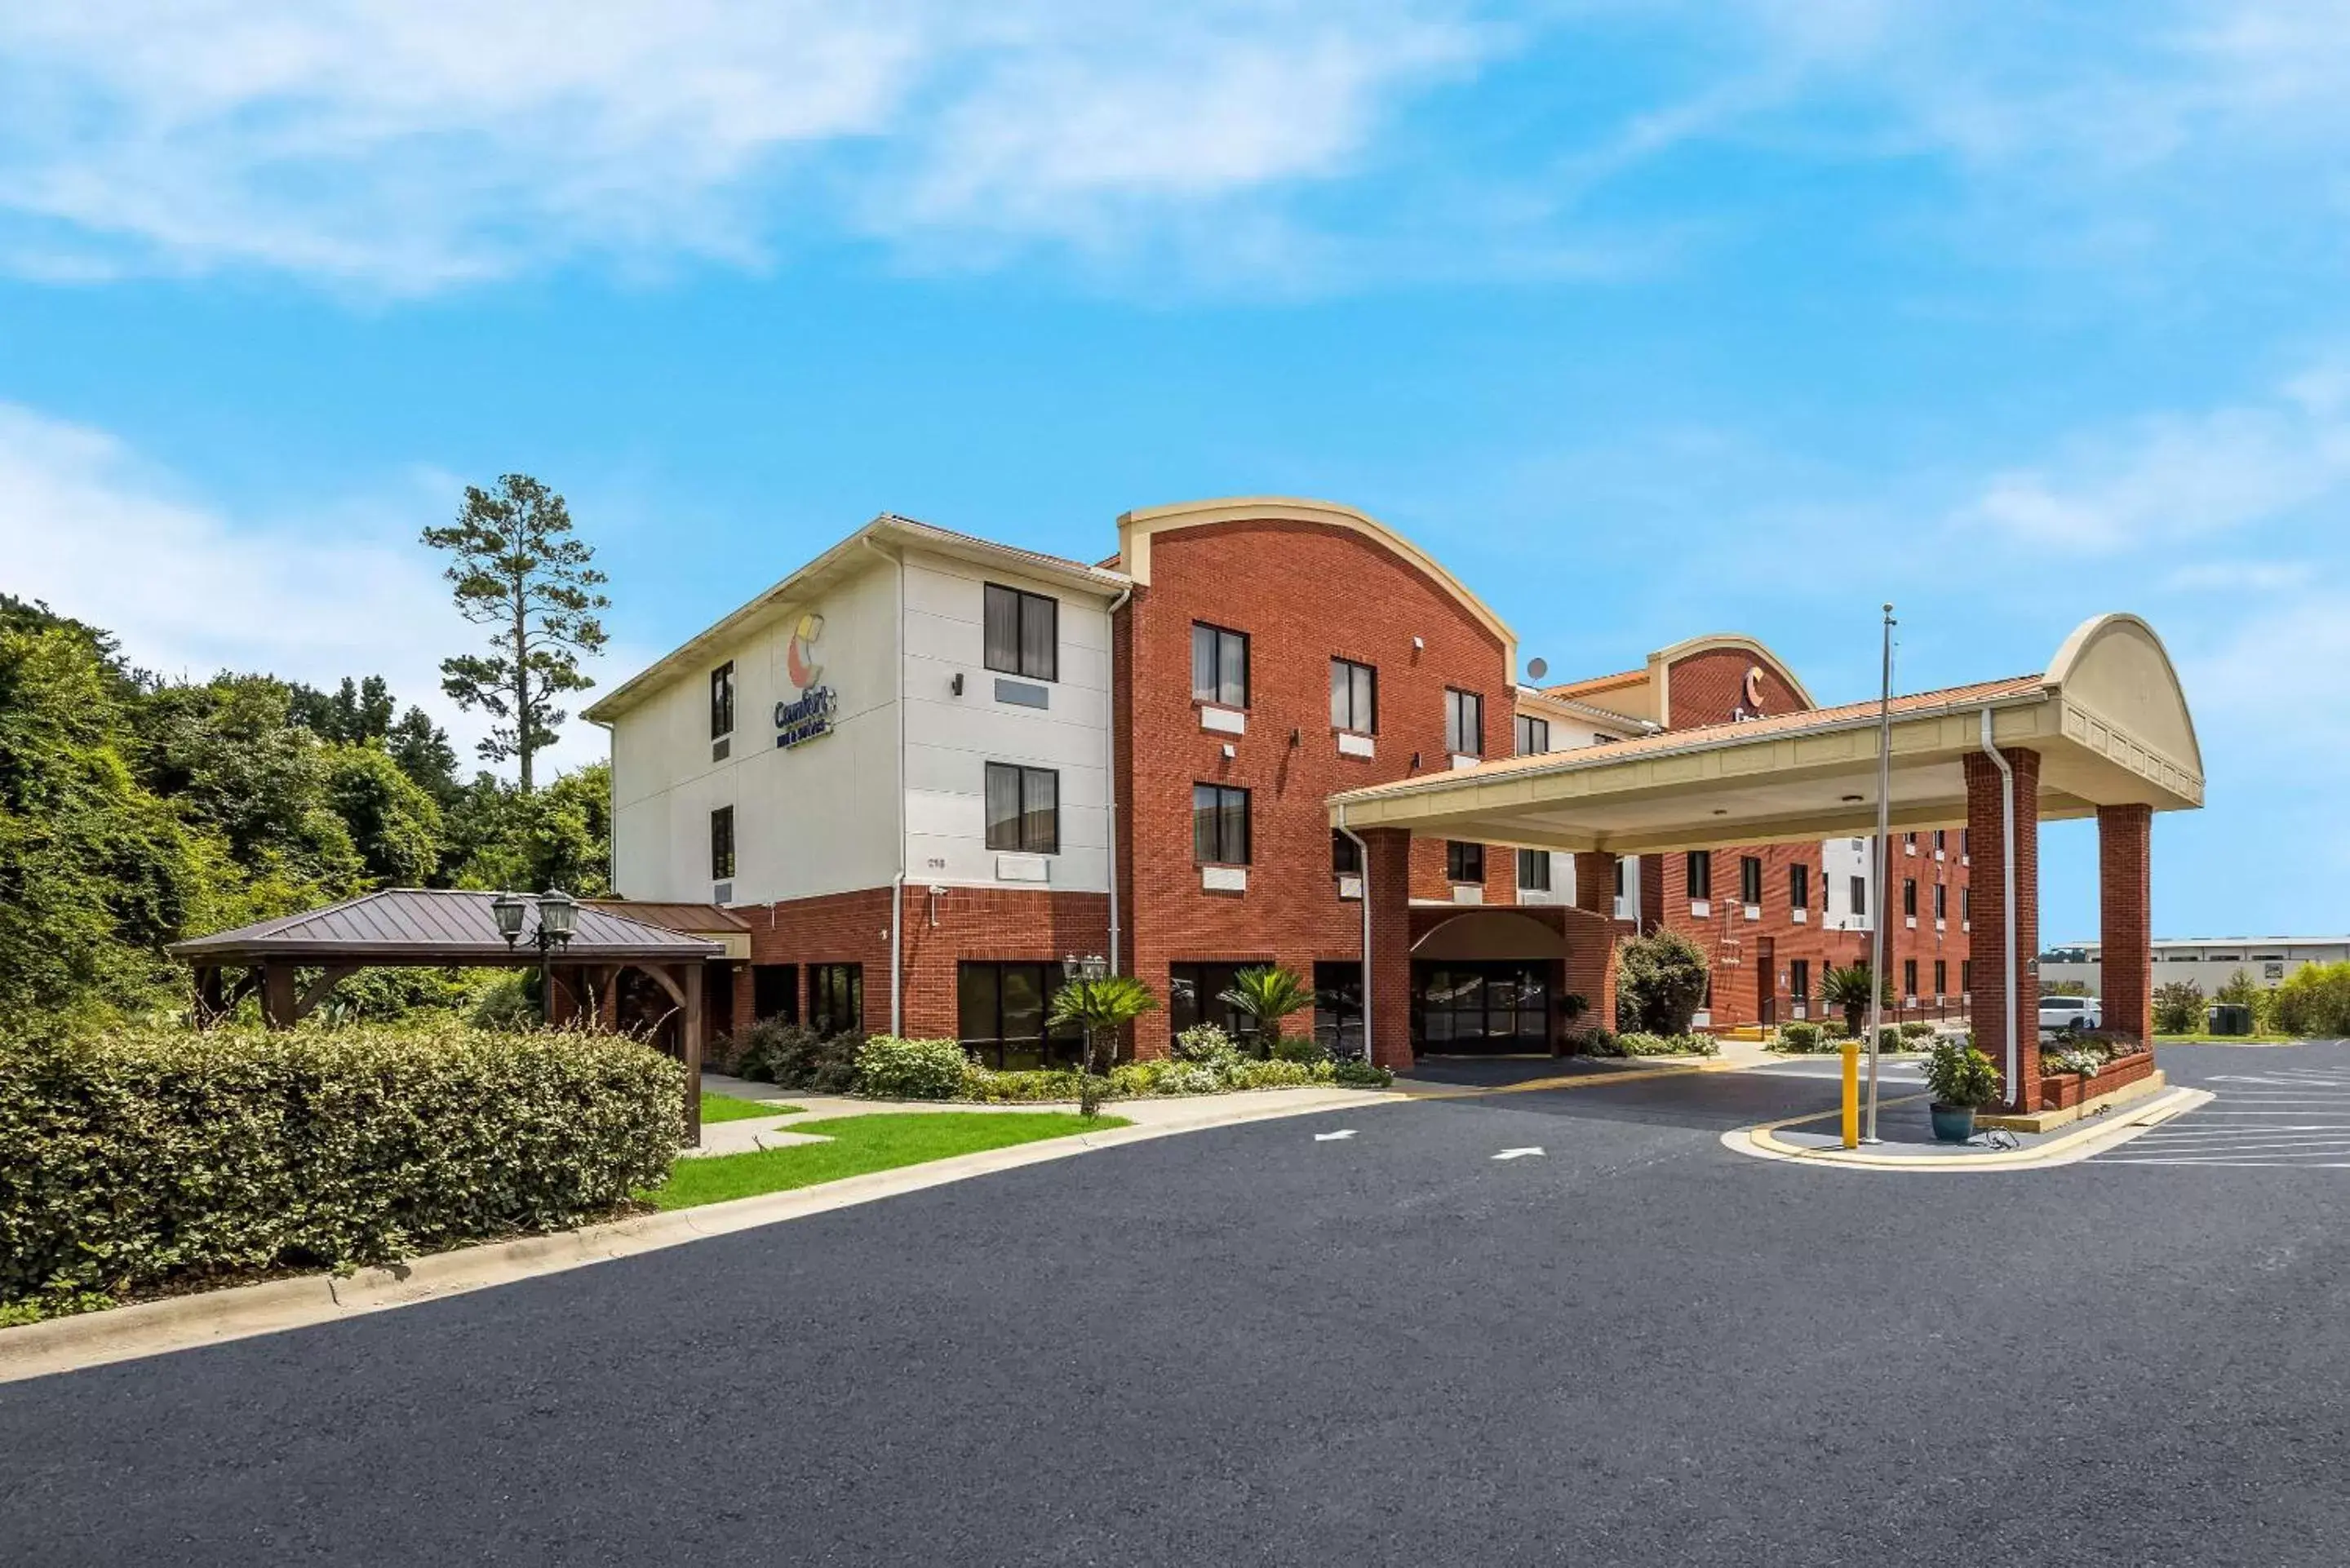 Property Building in Comfort Inn & Suites Midway - Tallahassee West